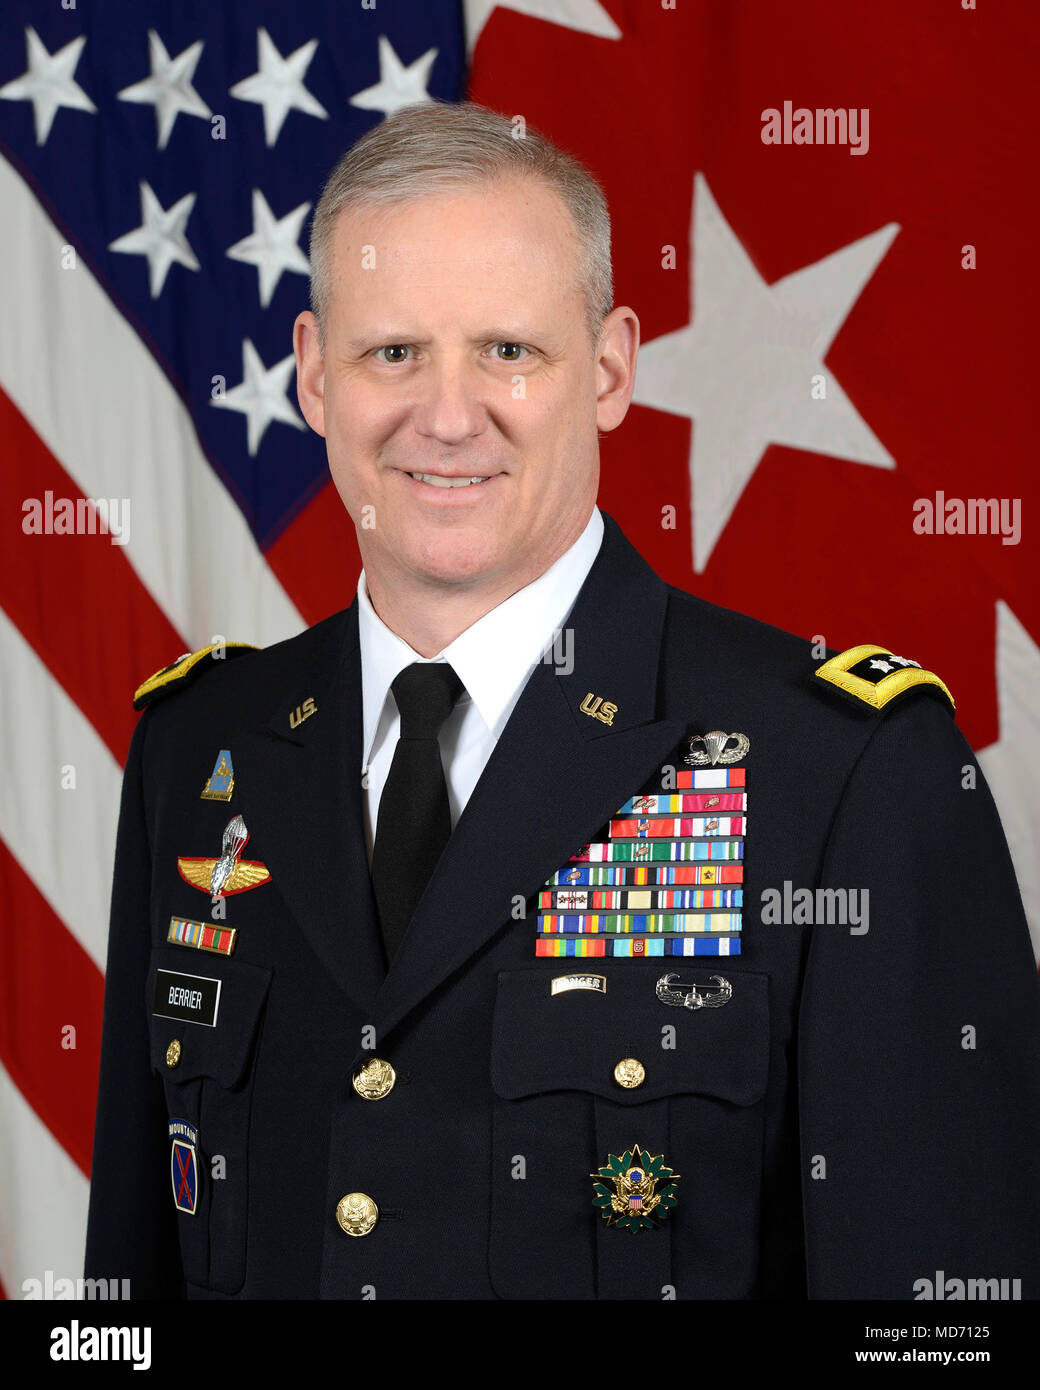 Us Army Lt Gen Scott D Berrier Assistant Chief Of Staff G2 Army Intelligence Poses For 